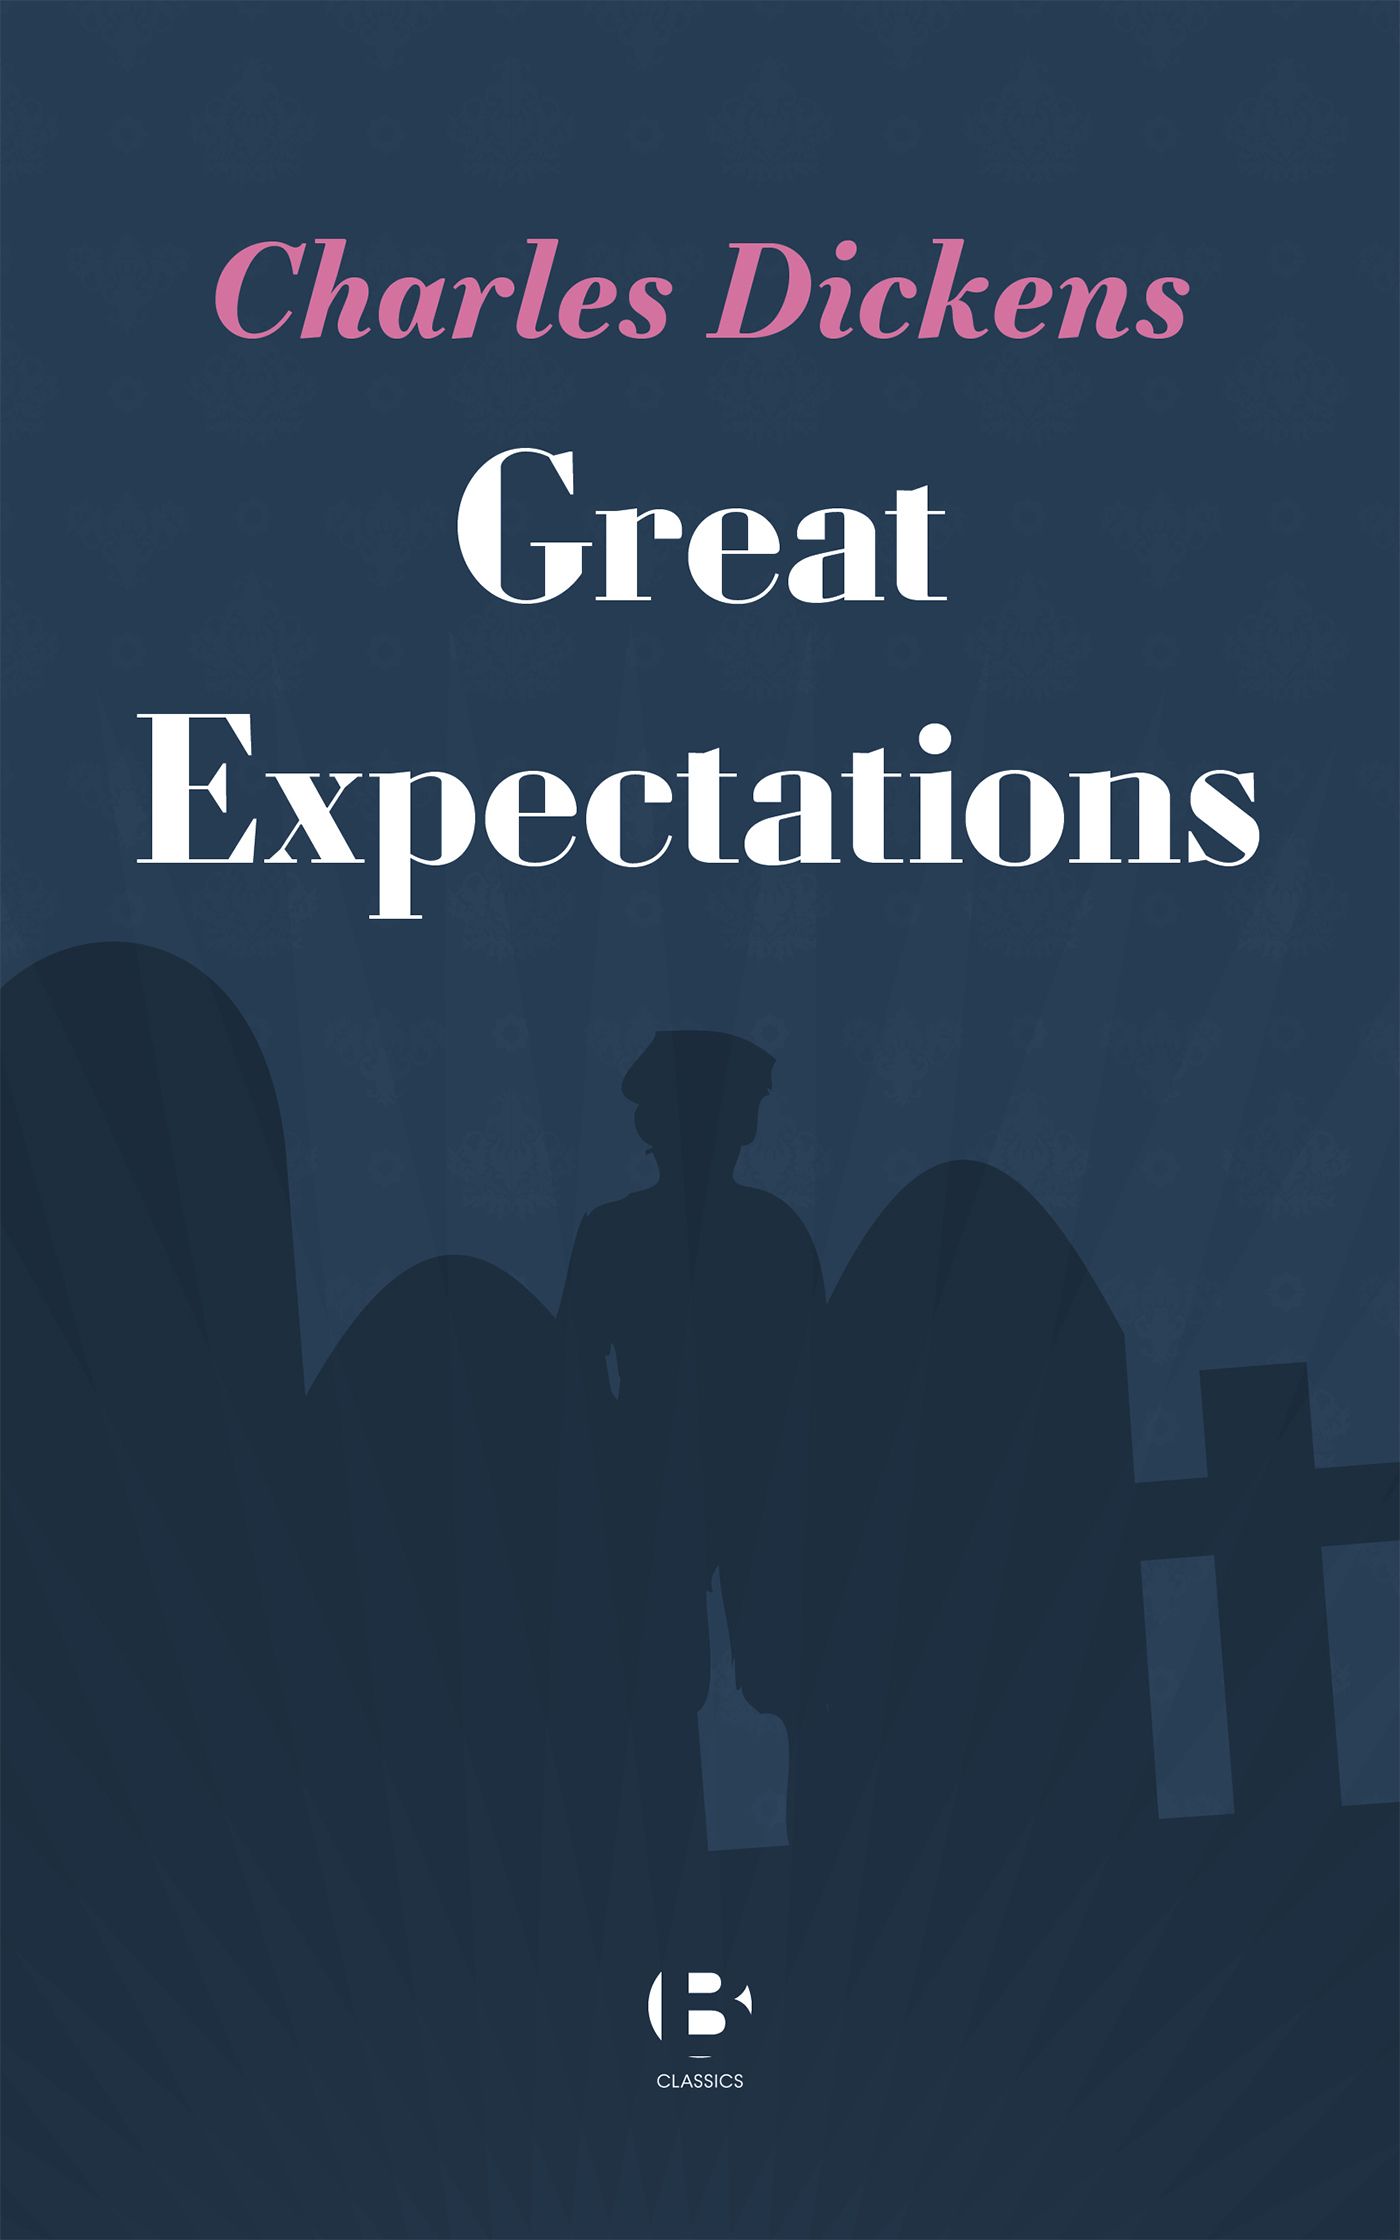 Great Expectations, eBook by Charles Dickens